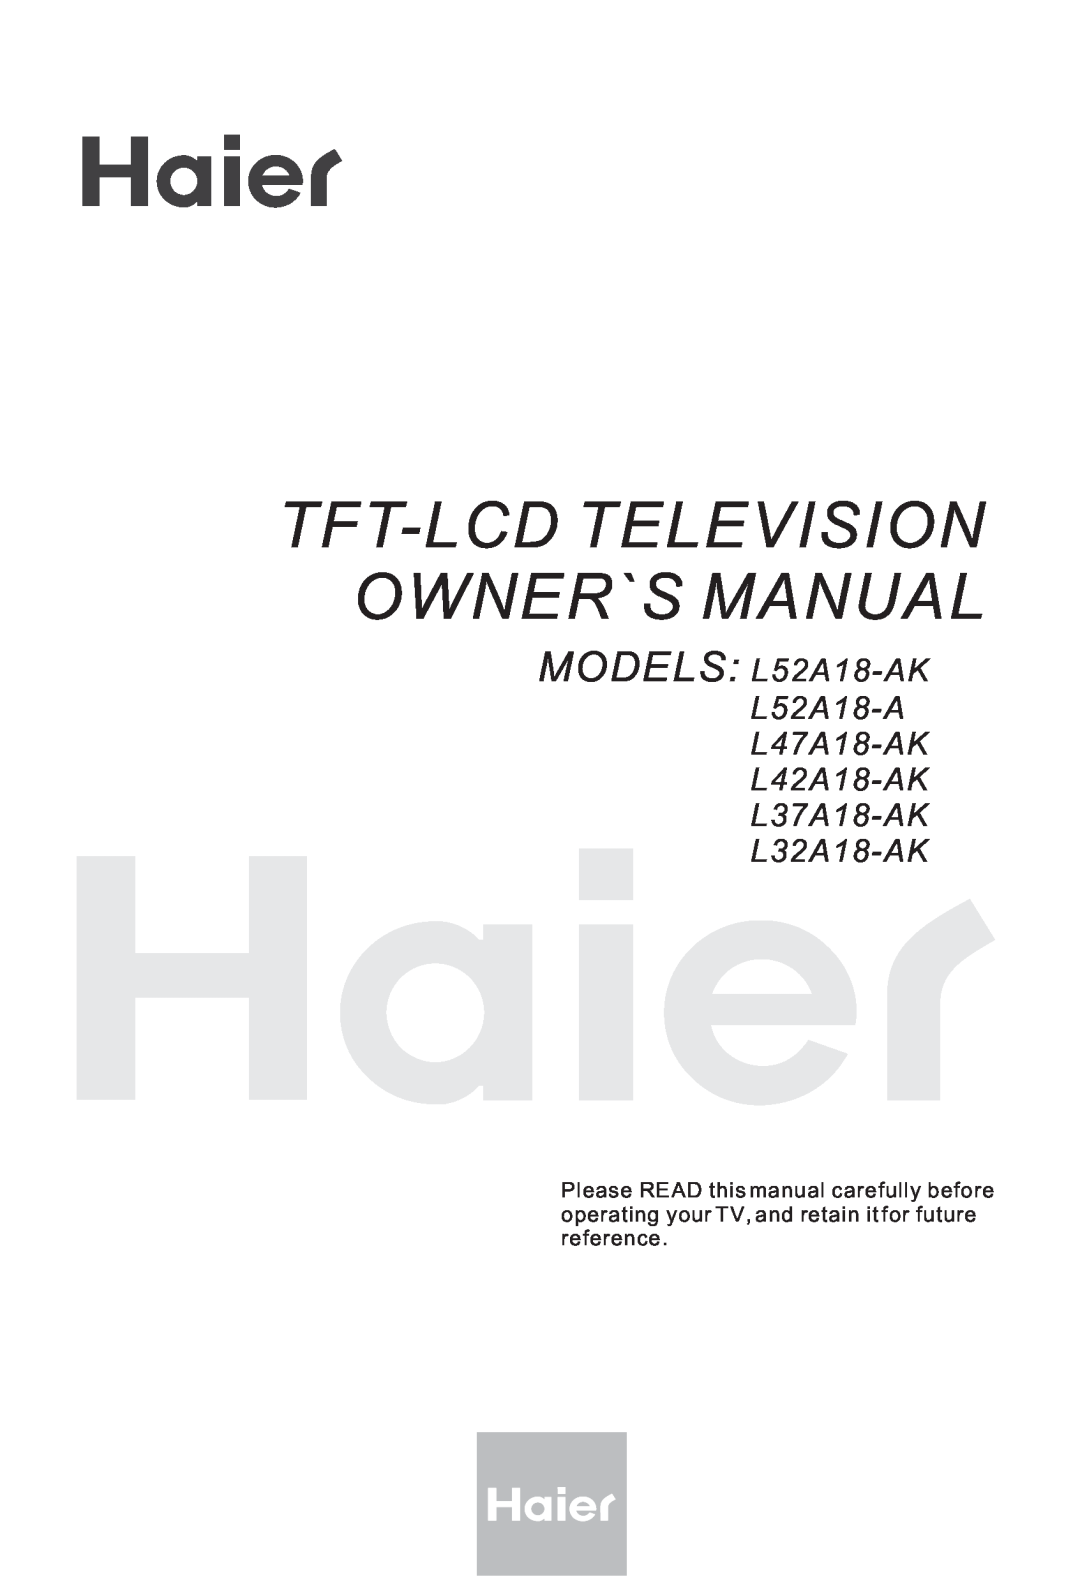 Haier L42A18-AK, L47A18-AK, L52A18-A, L37A18-AK owner manual Tft-Lcd Television Owner`S Manual 